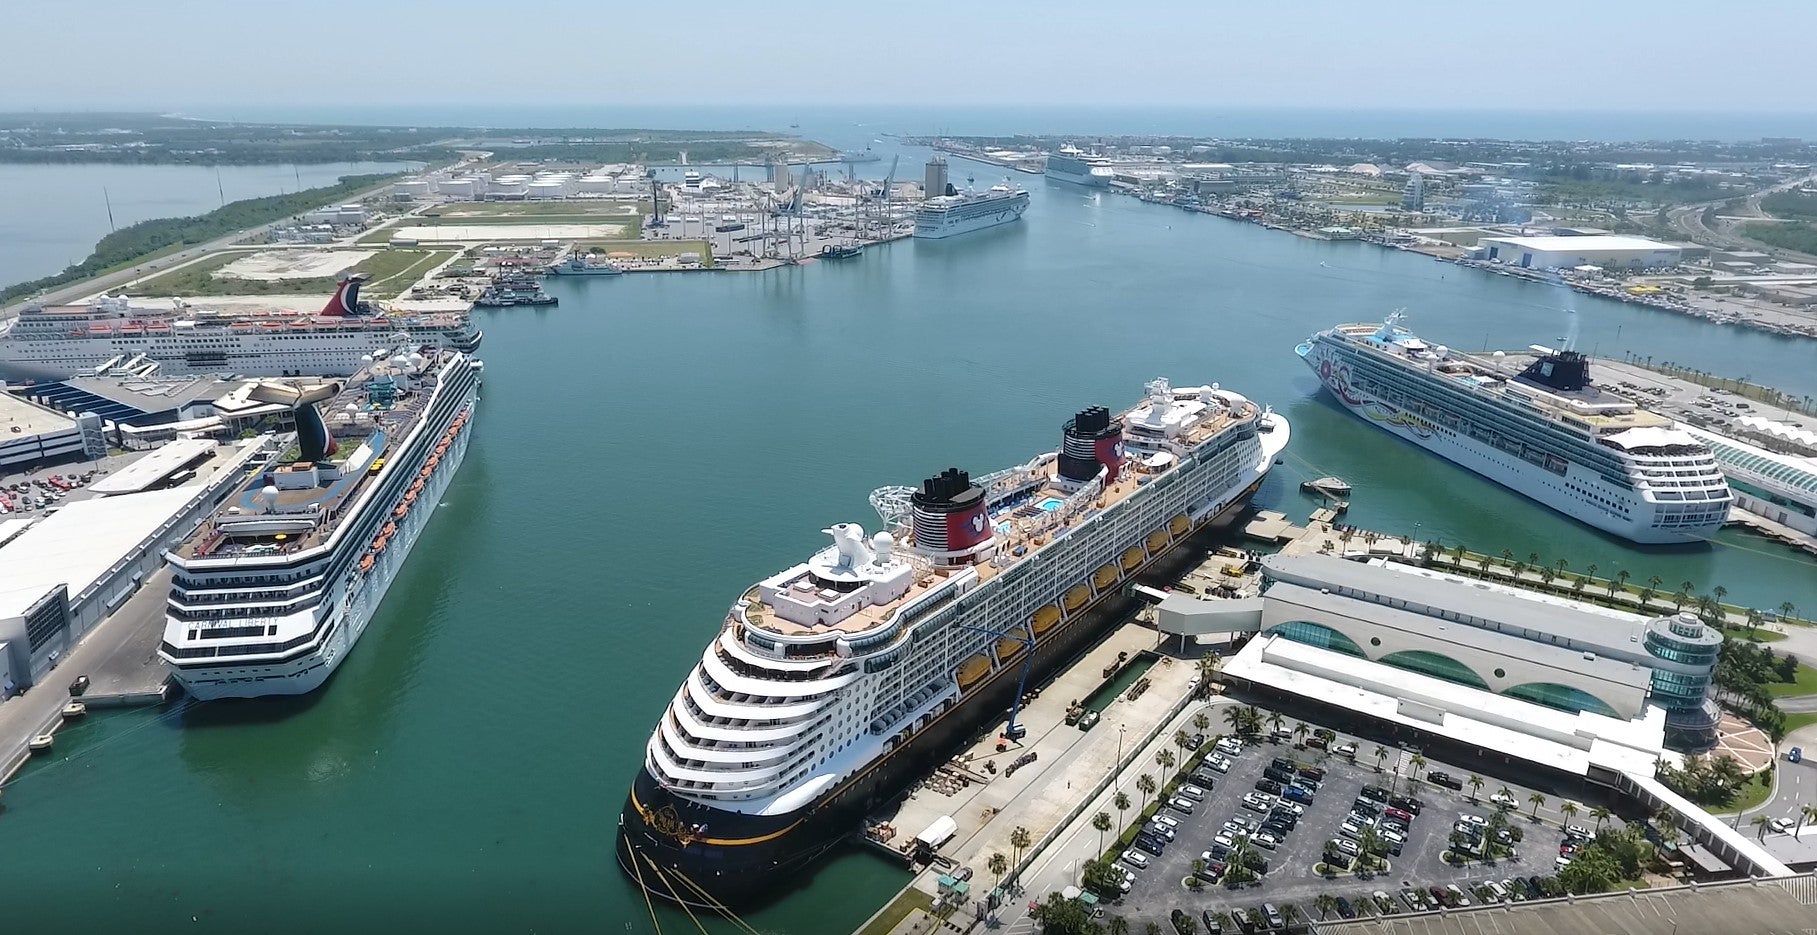 TPG's complete guide to cruising from Florida’s Port Canaveral The